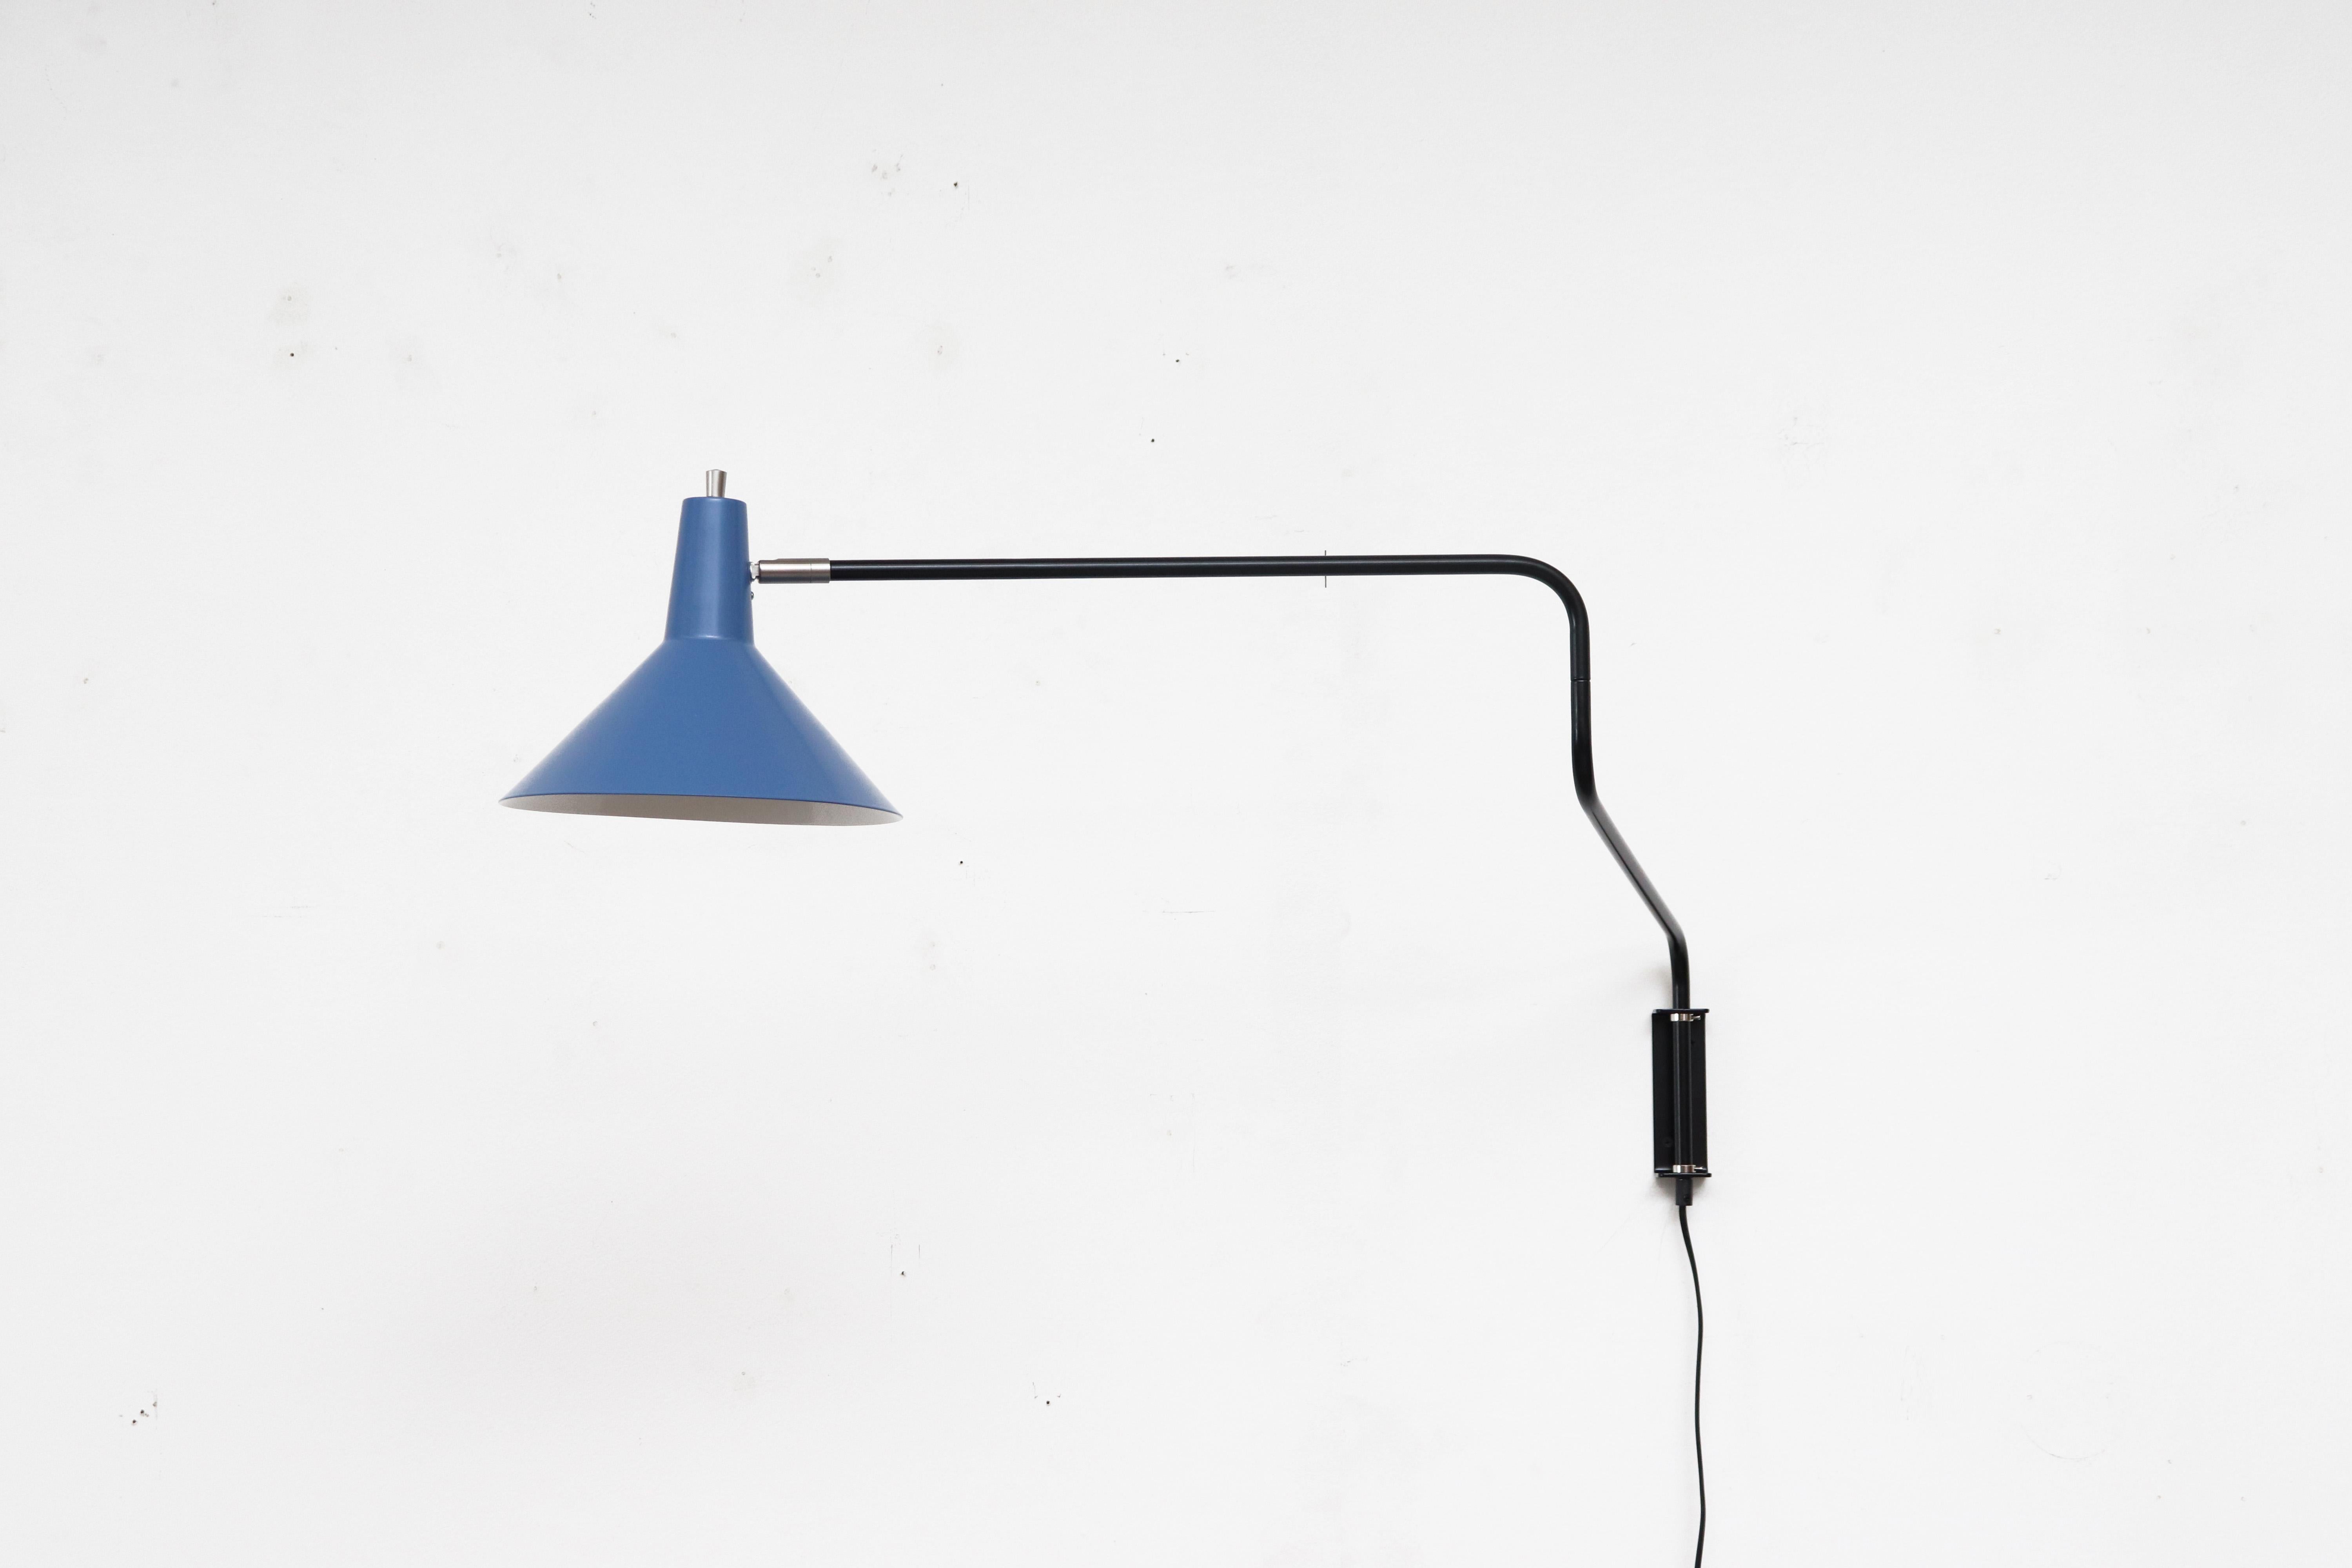 Newly re-issued Anvia 'The Paper Clip' wall lamp in blue with black frame. Has paper clip style arm that swings to extend or retract for versatile use and tilting/rotating shade. More colors available.